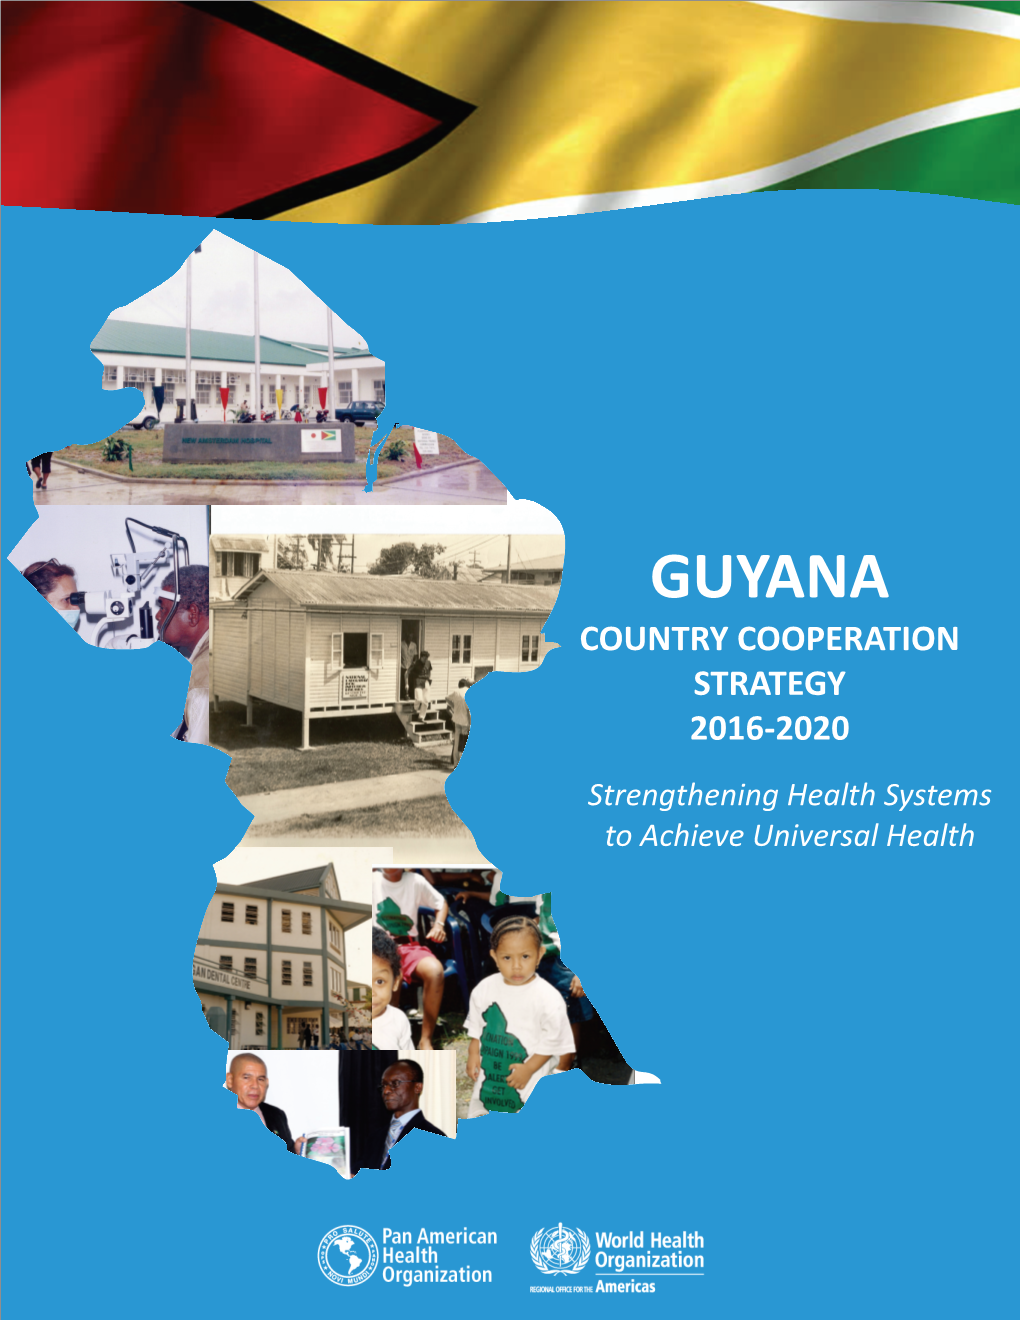 GUYANA COUNTRY COOPERATION STRATEGY 2016-2020 Strengthening Health Systems to Achieve Universal Health GUYANA COUNTRY COOPERATION STRATEGY 2016-2020